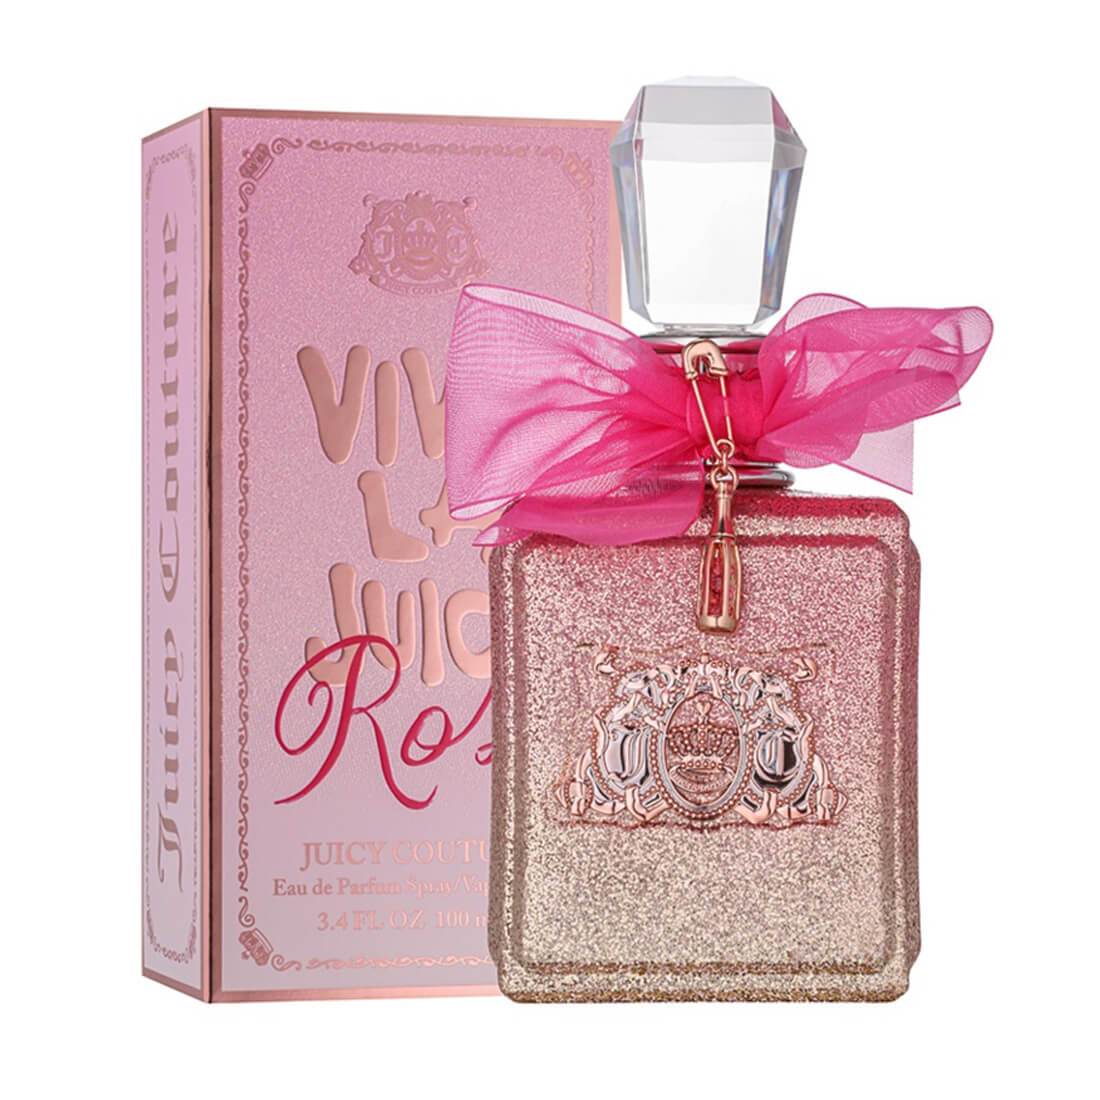 Juicy Couture Rose | peacecommission.kdsg.gov.ng